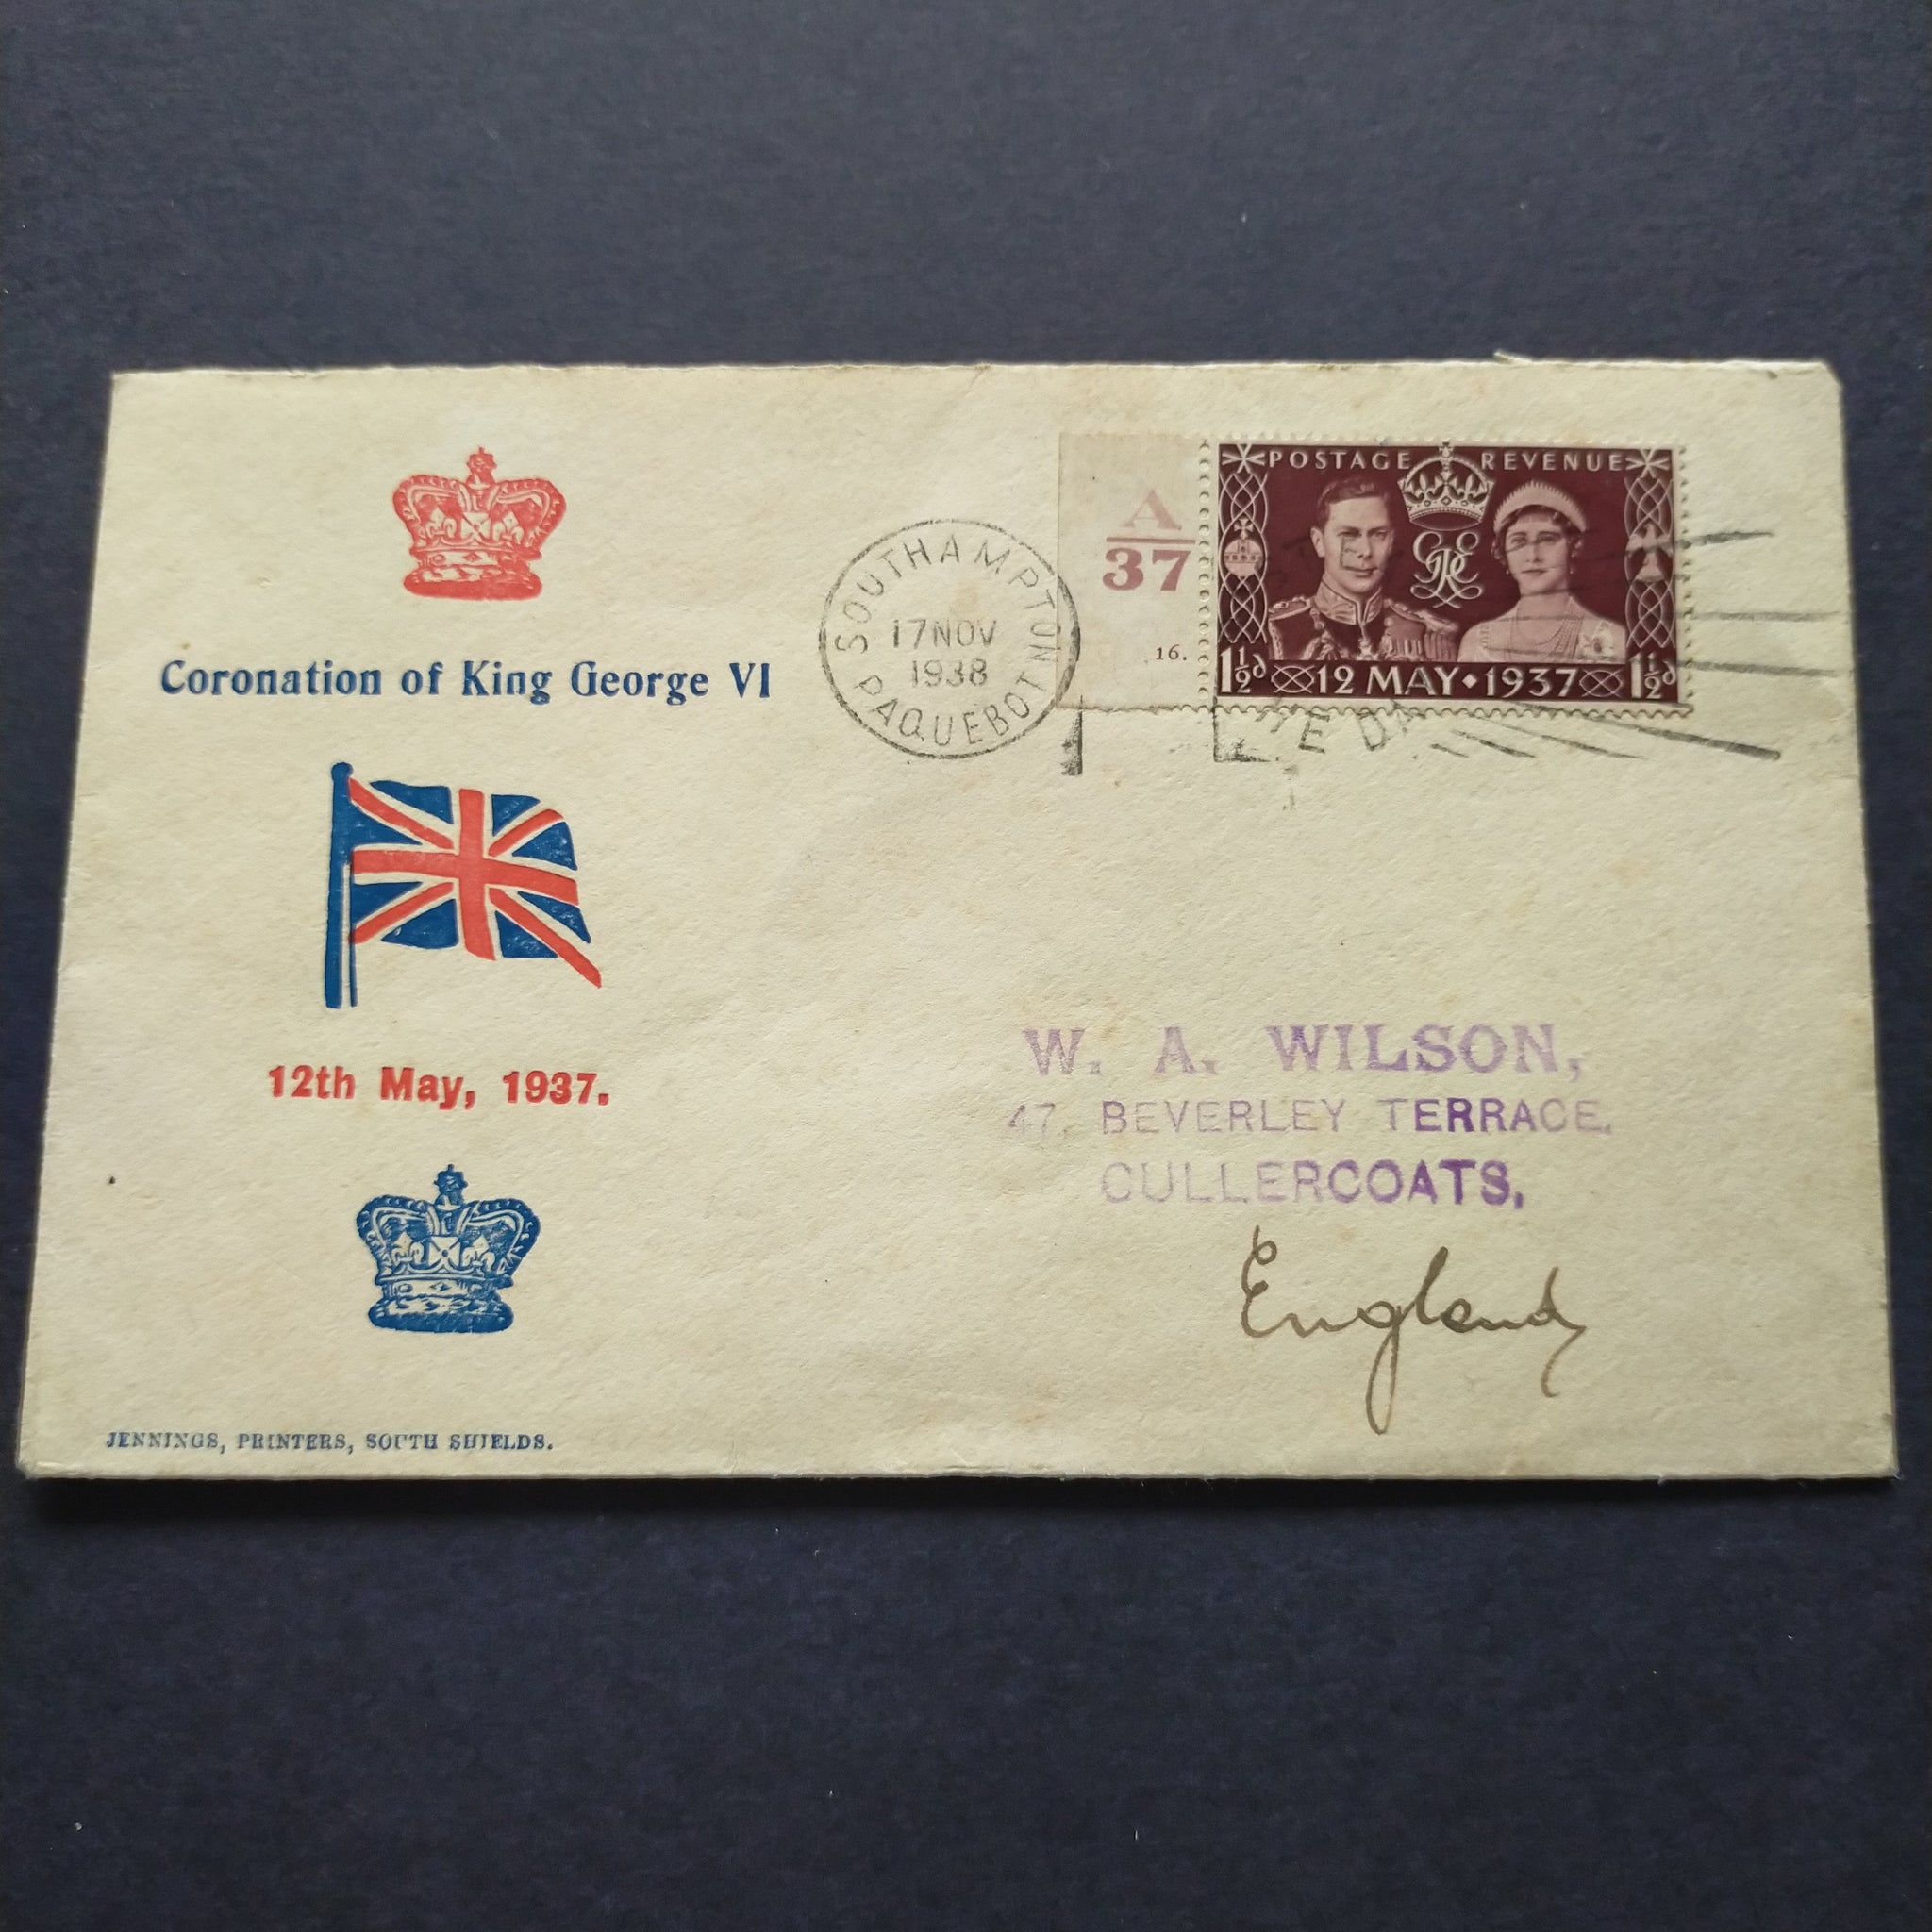 Pitcairn Islands Coronation of King George VI Cover 1938 Southampton Paquebot CDS Pitcairn Islands to England